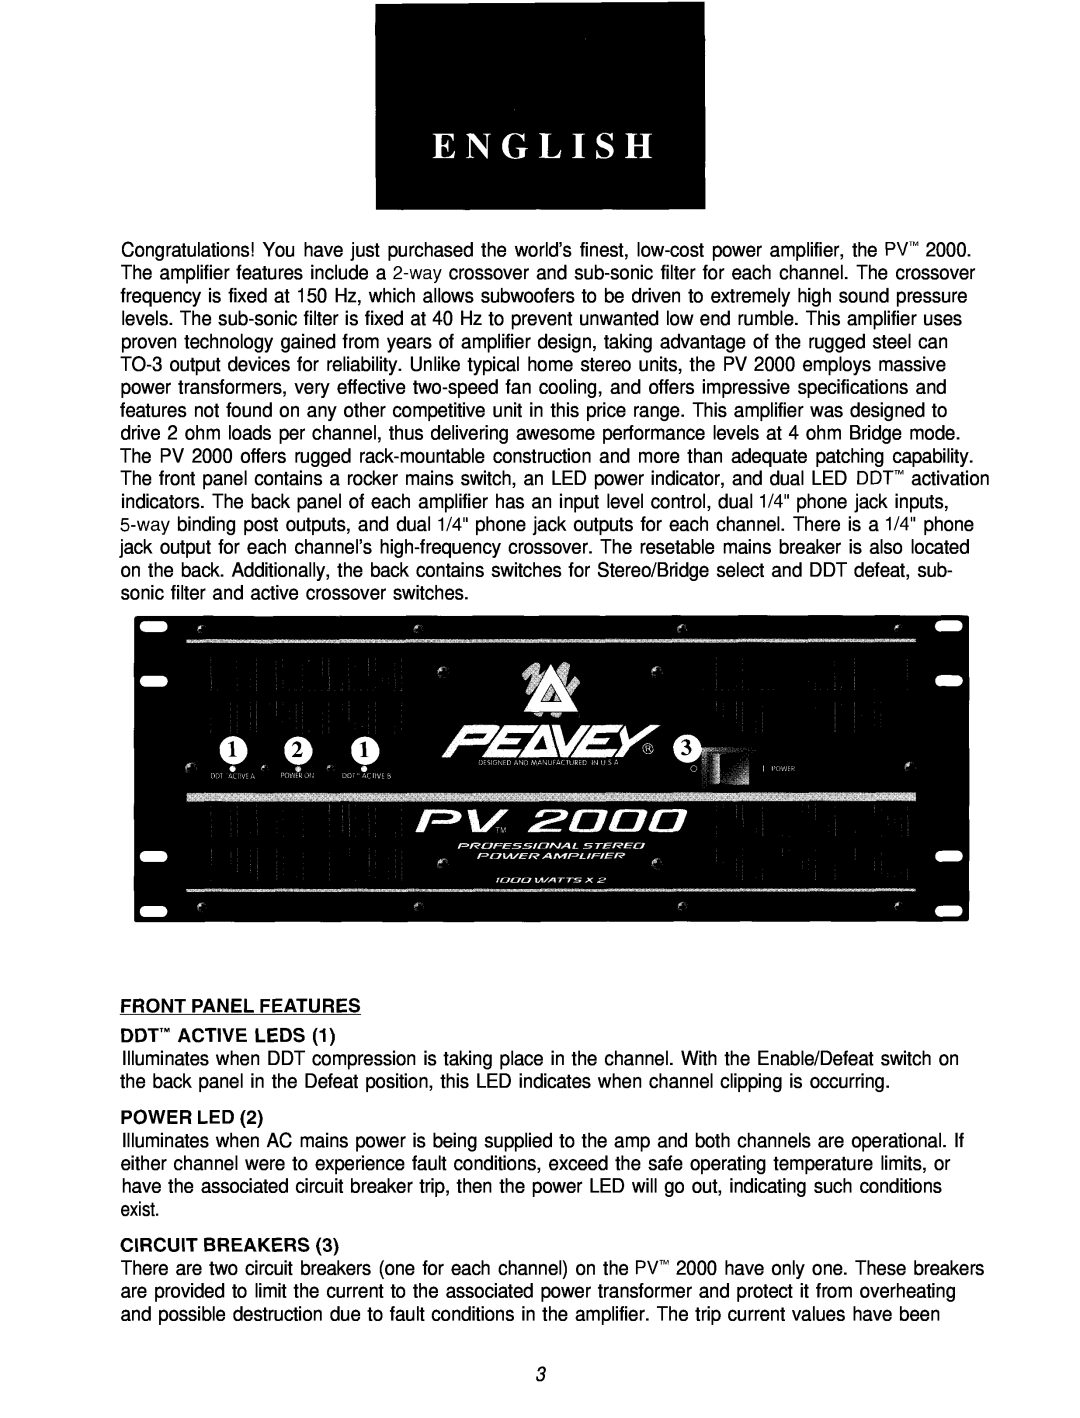 Peavey PV 2000 manual Front Panel Features Ddt’” Active Leds, Power Led, Circuit Breakers 